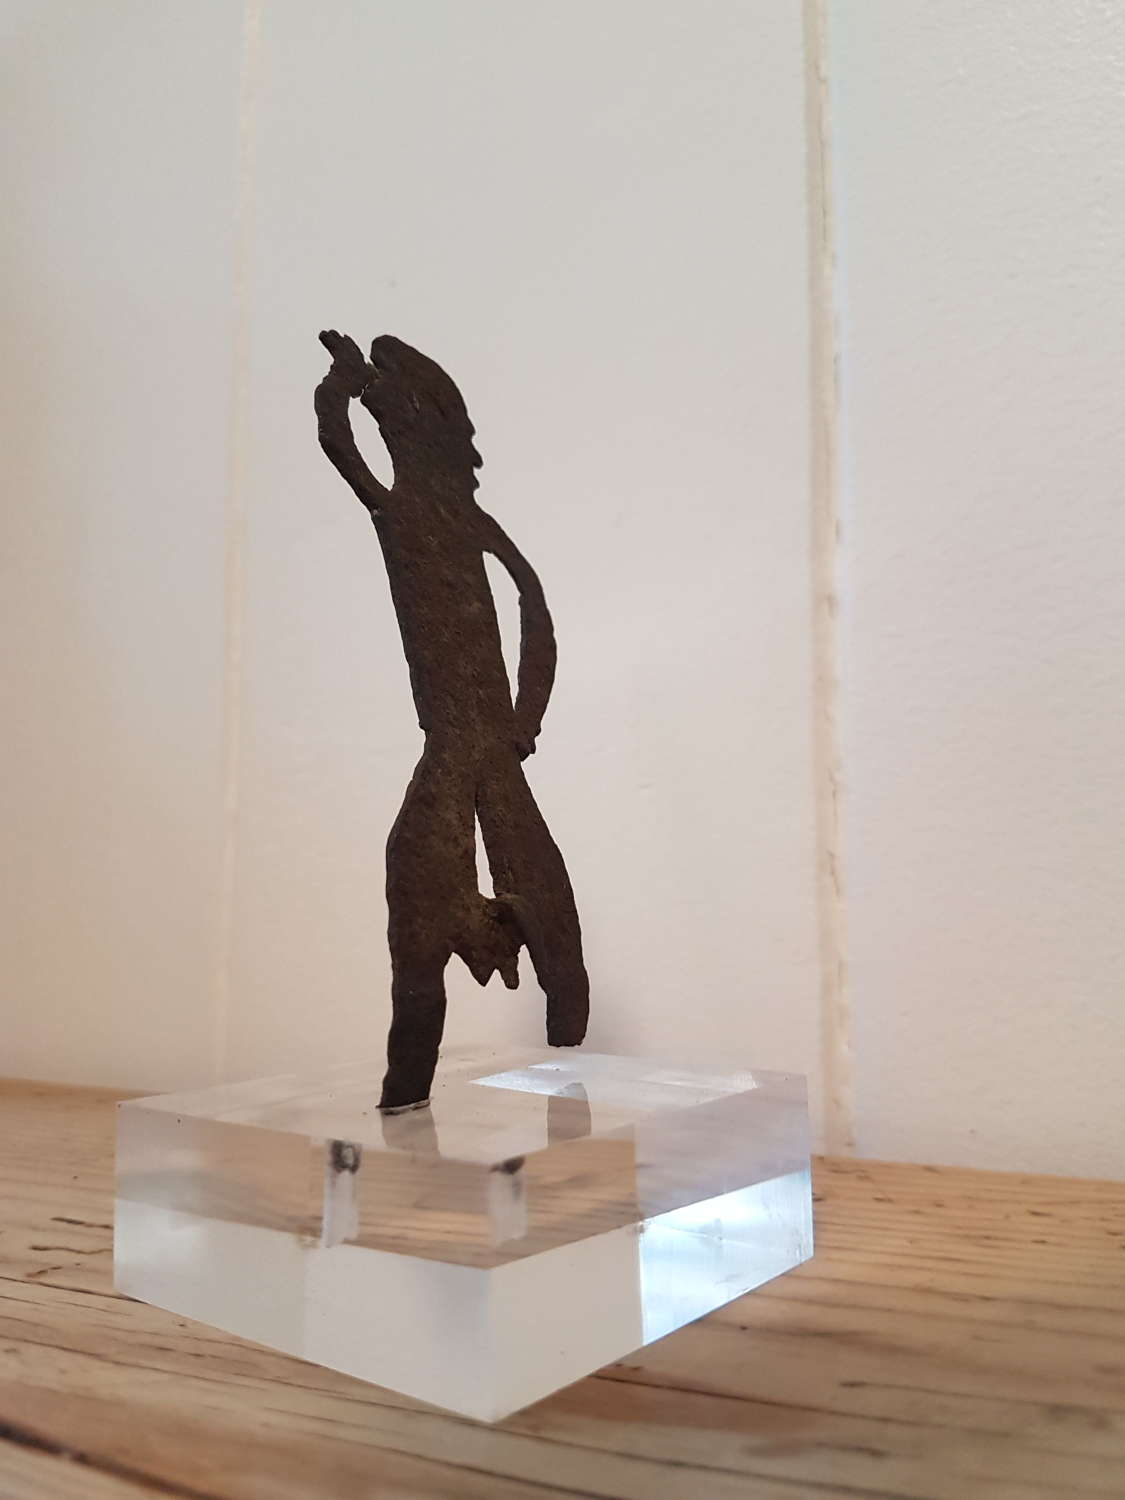 West African Iron Currency Male Figure on Lucite Stand